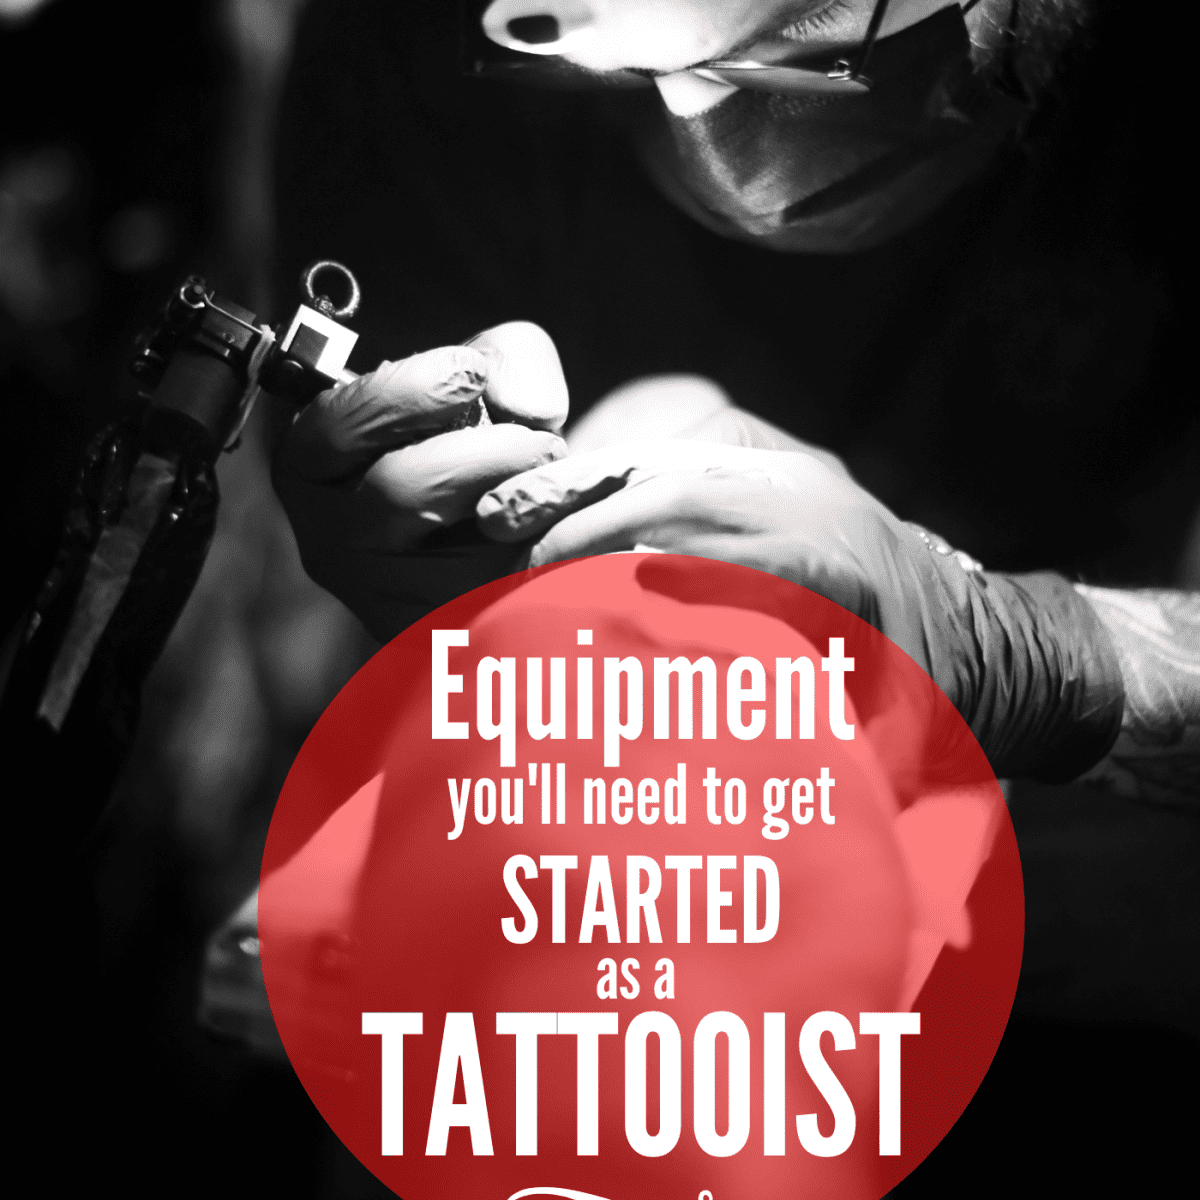 Beginning to Tattoo: What Equipment Do You Need to Be a Tattoo Artist? - TatRing